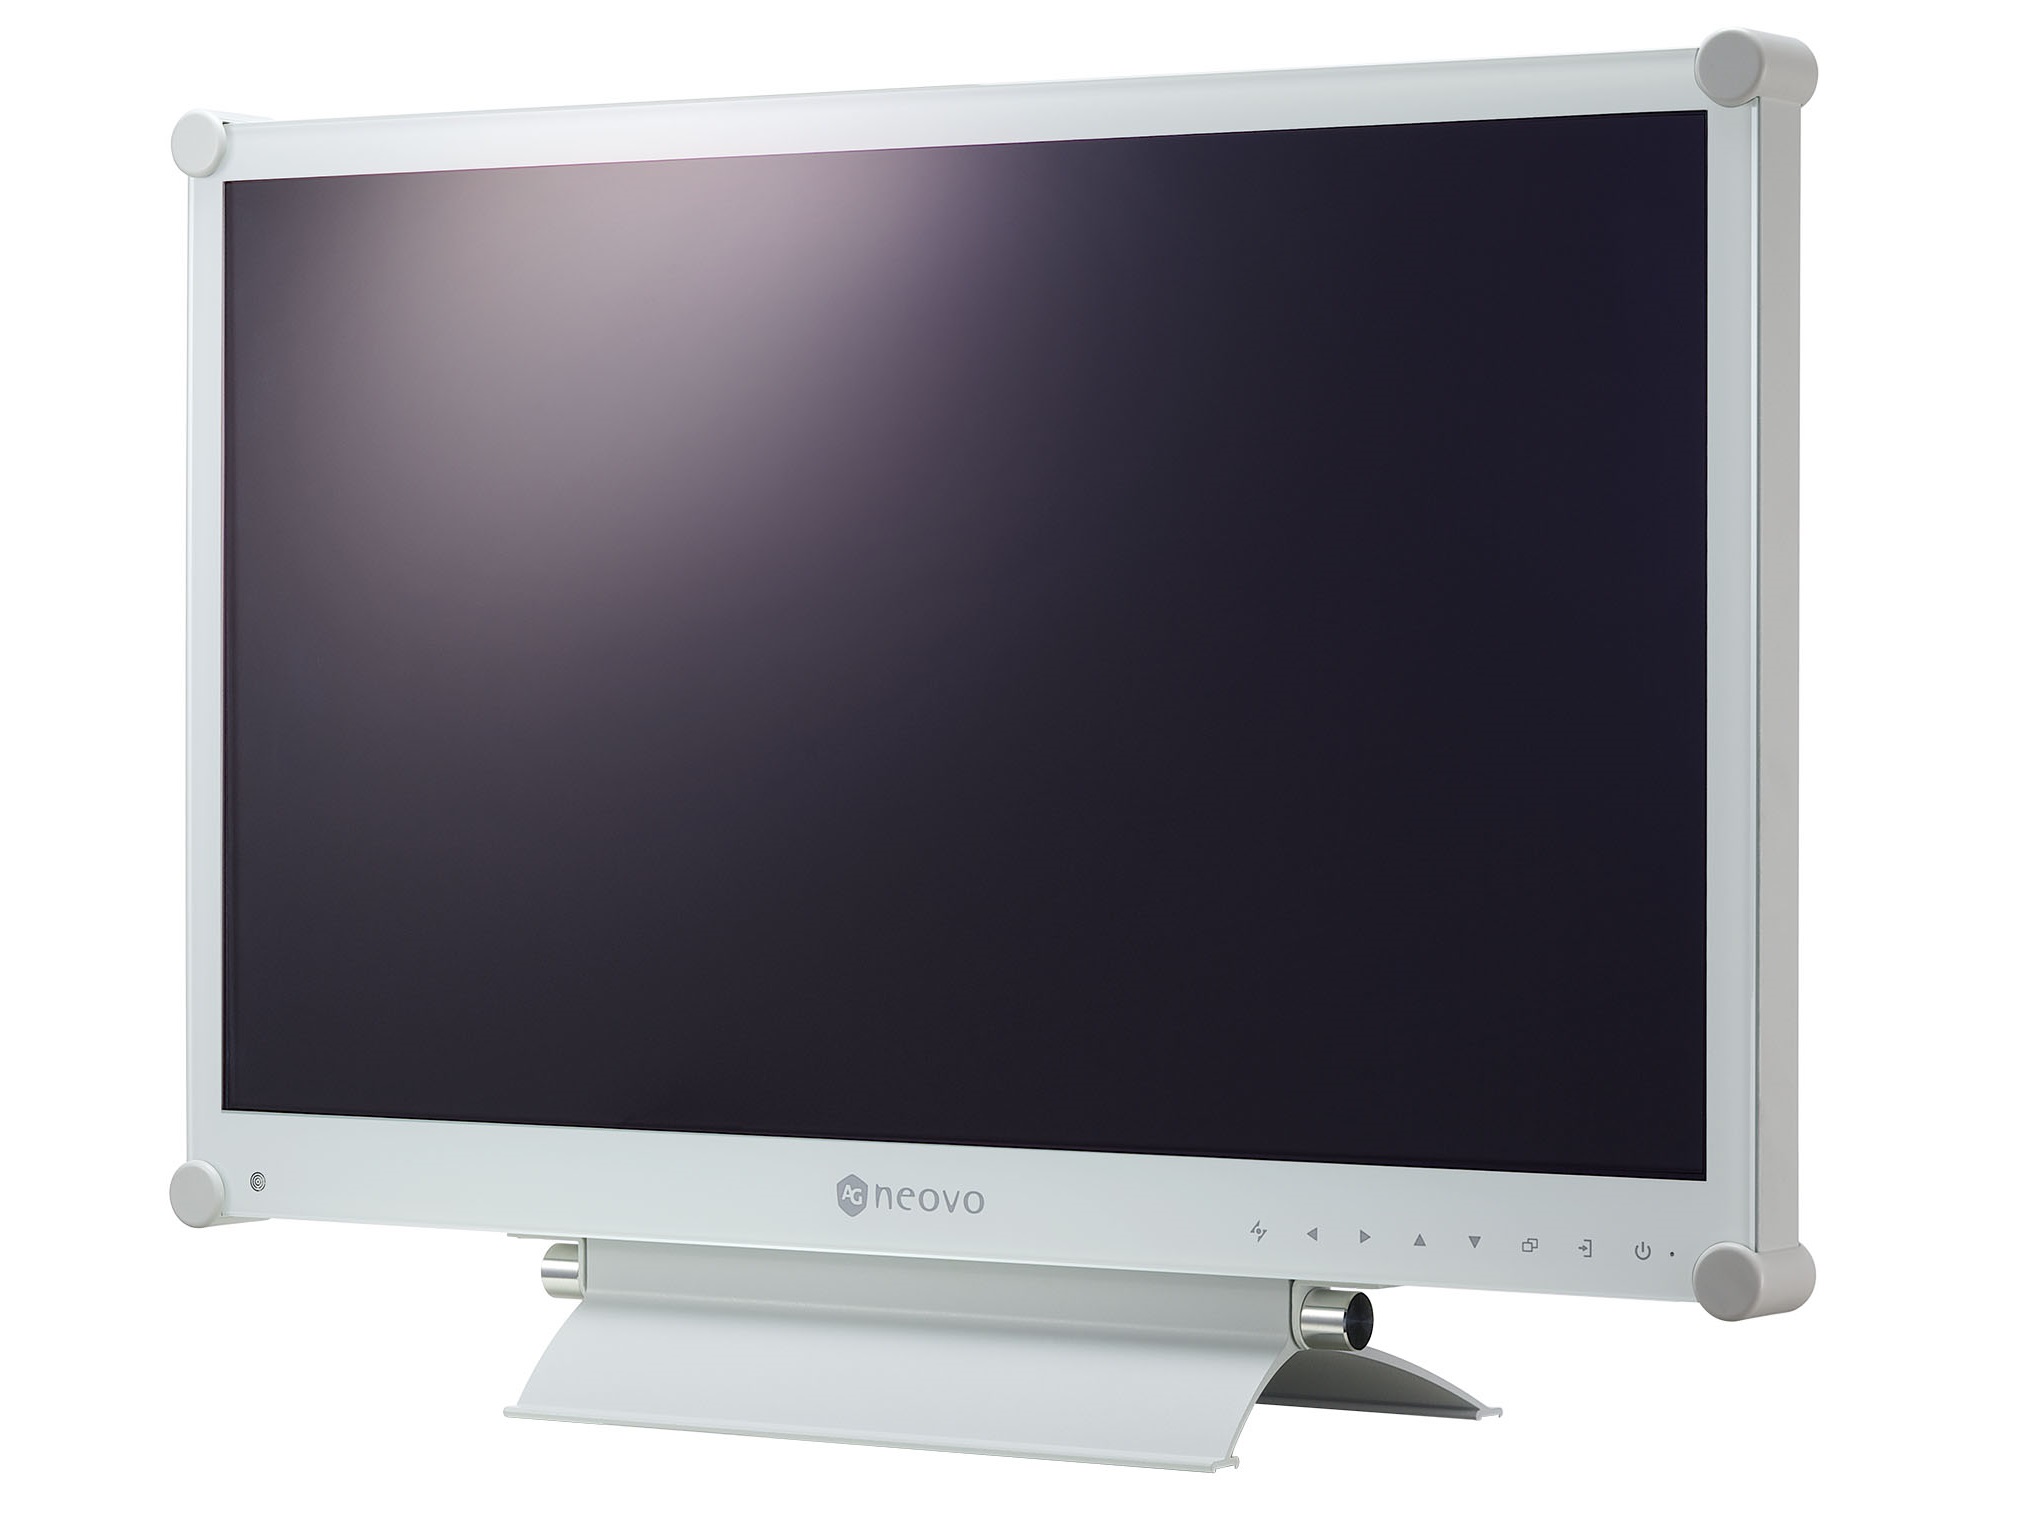 MX-24 24 inch 1080p DICOM Compatible Monitor by AG Neovo